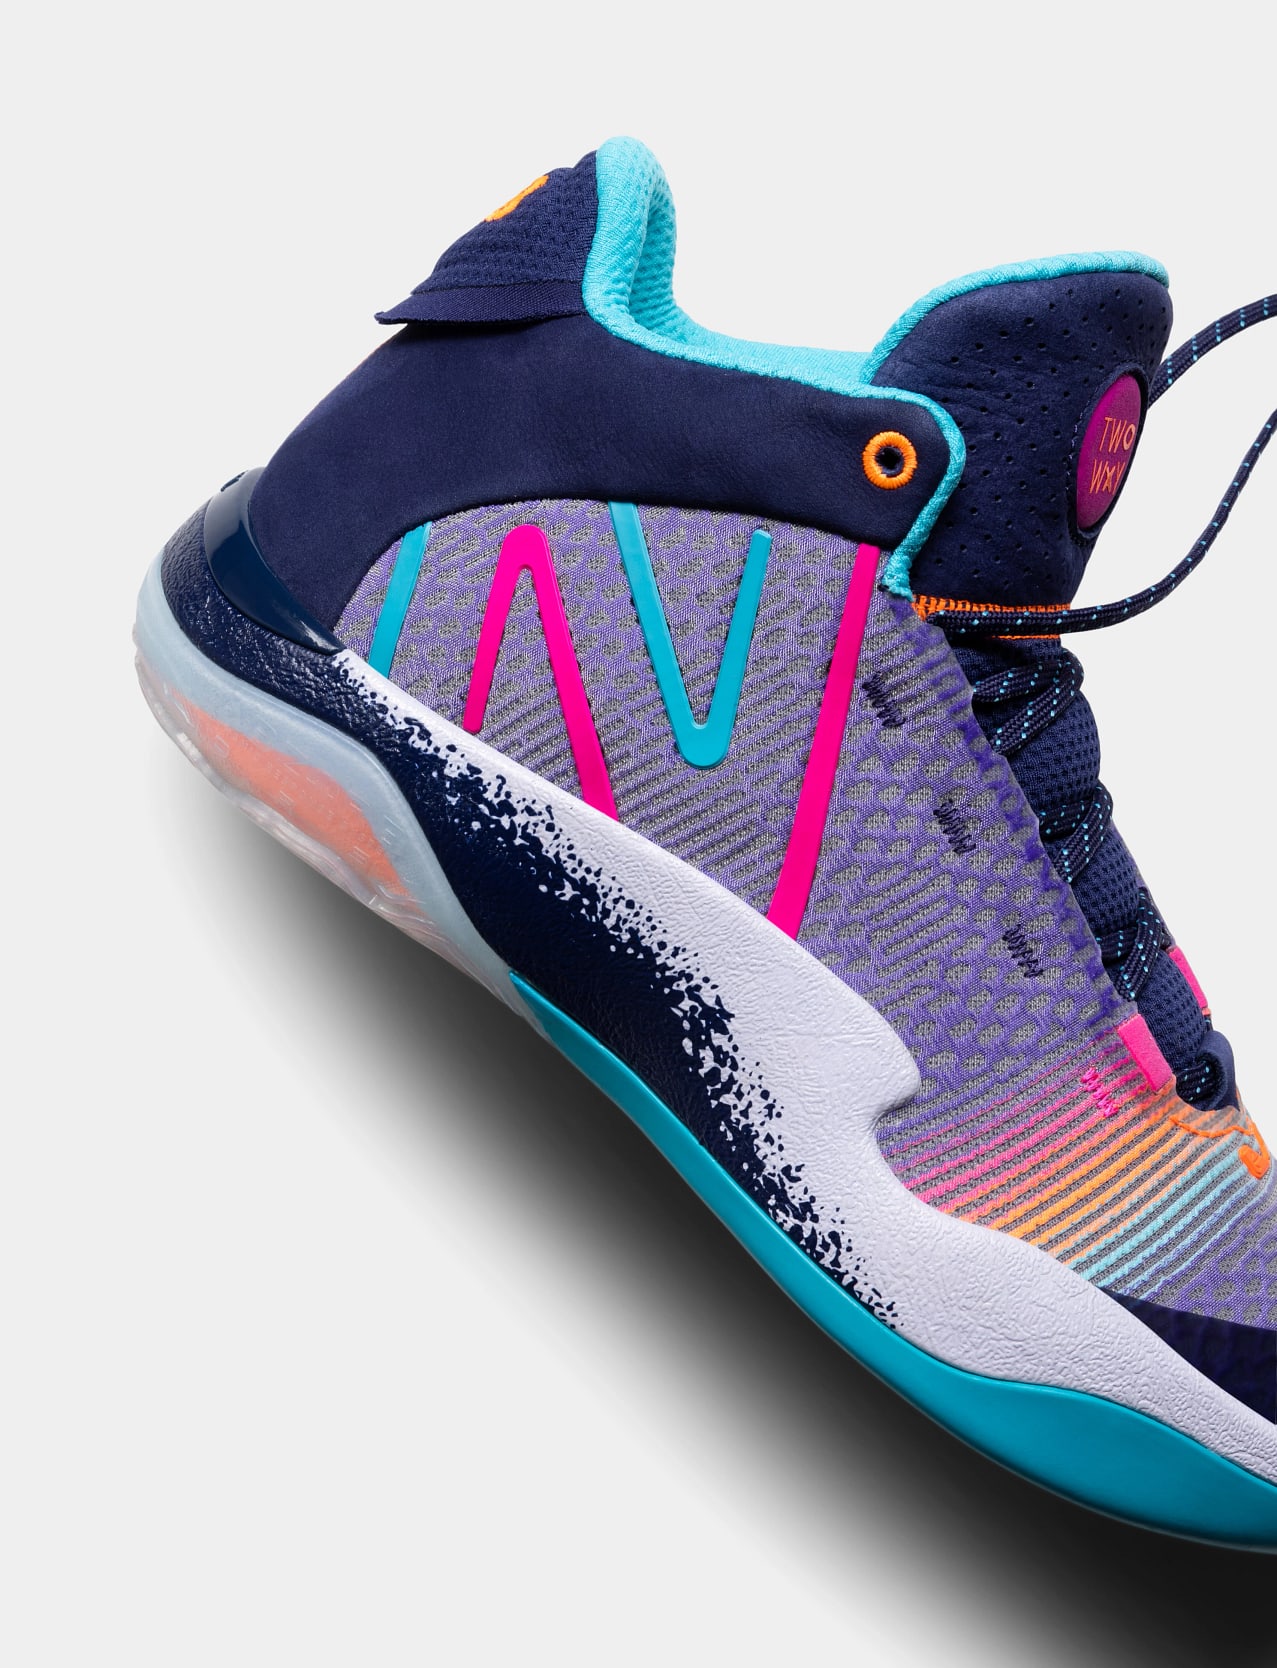 New Balance Two Wxy V2 Basketball Shoe Release Date May 2022 